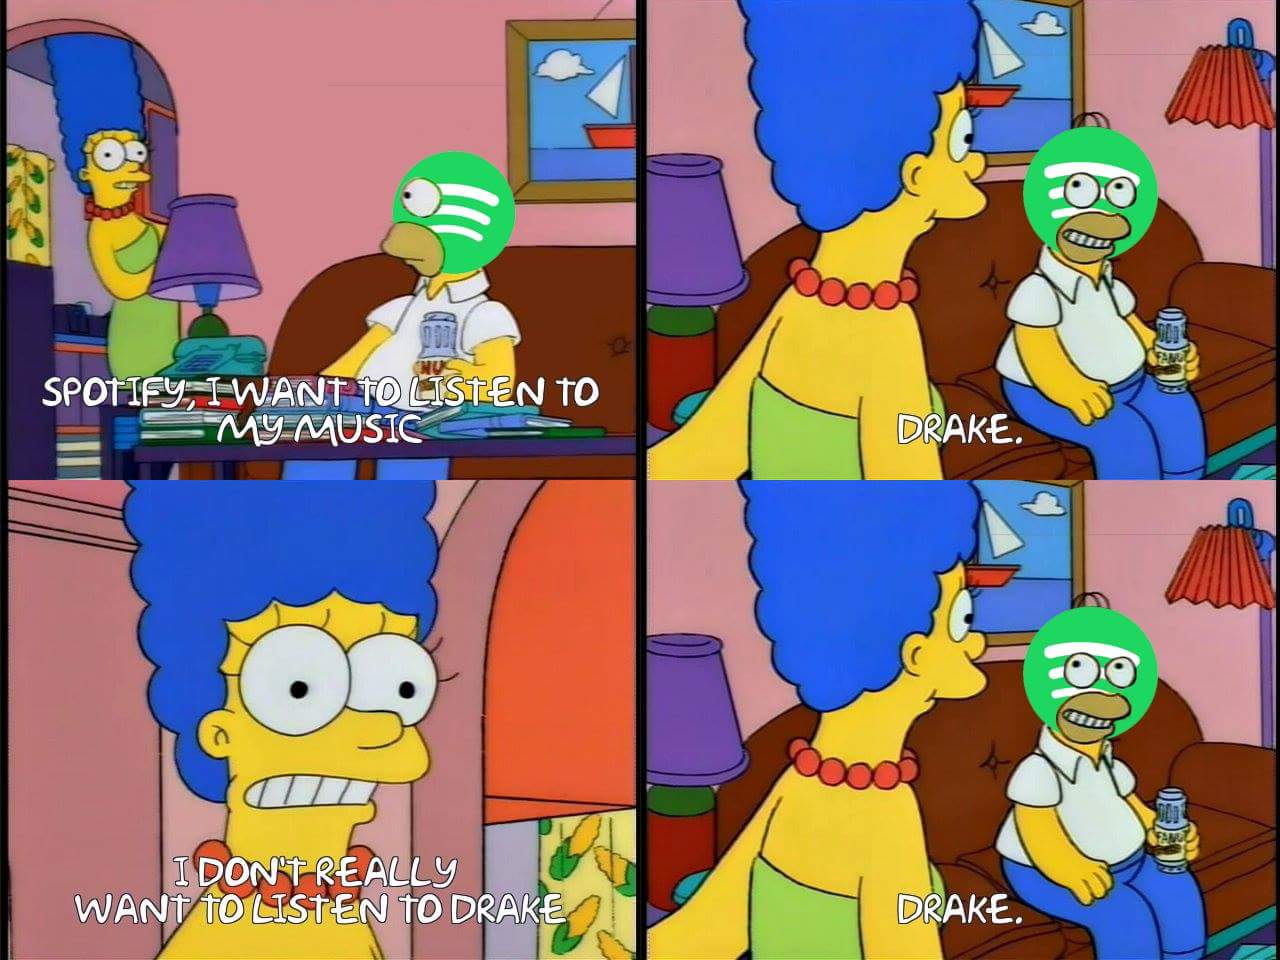 meme - spotify sucks memes - Spotify, I Want To Listen To My Music Drake. I Dont Really Want To Listen To Drake Drake.